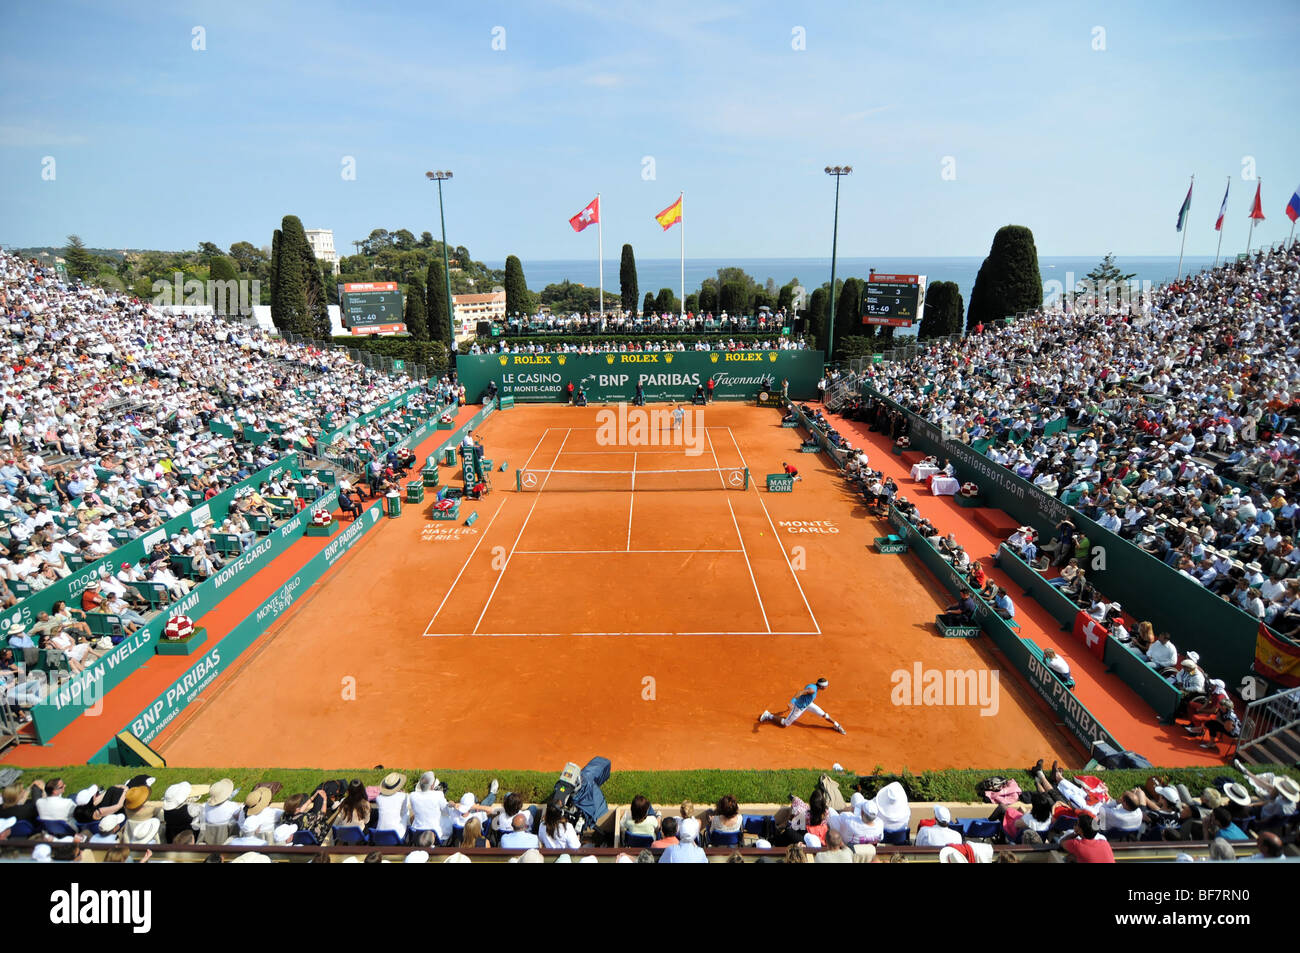 Monte Carlo: Final of the "ATP masters series" tennis tournament  (2008/04/27 Stock Photo - Alamy